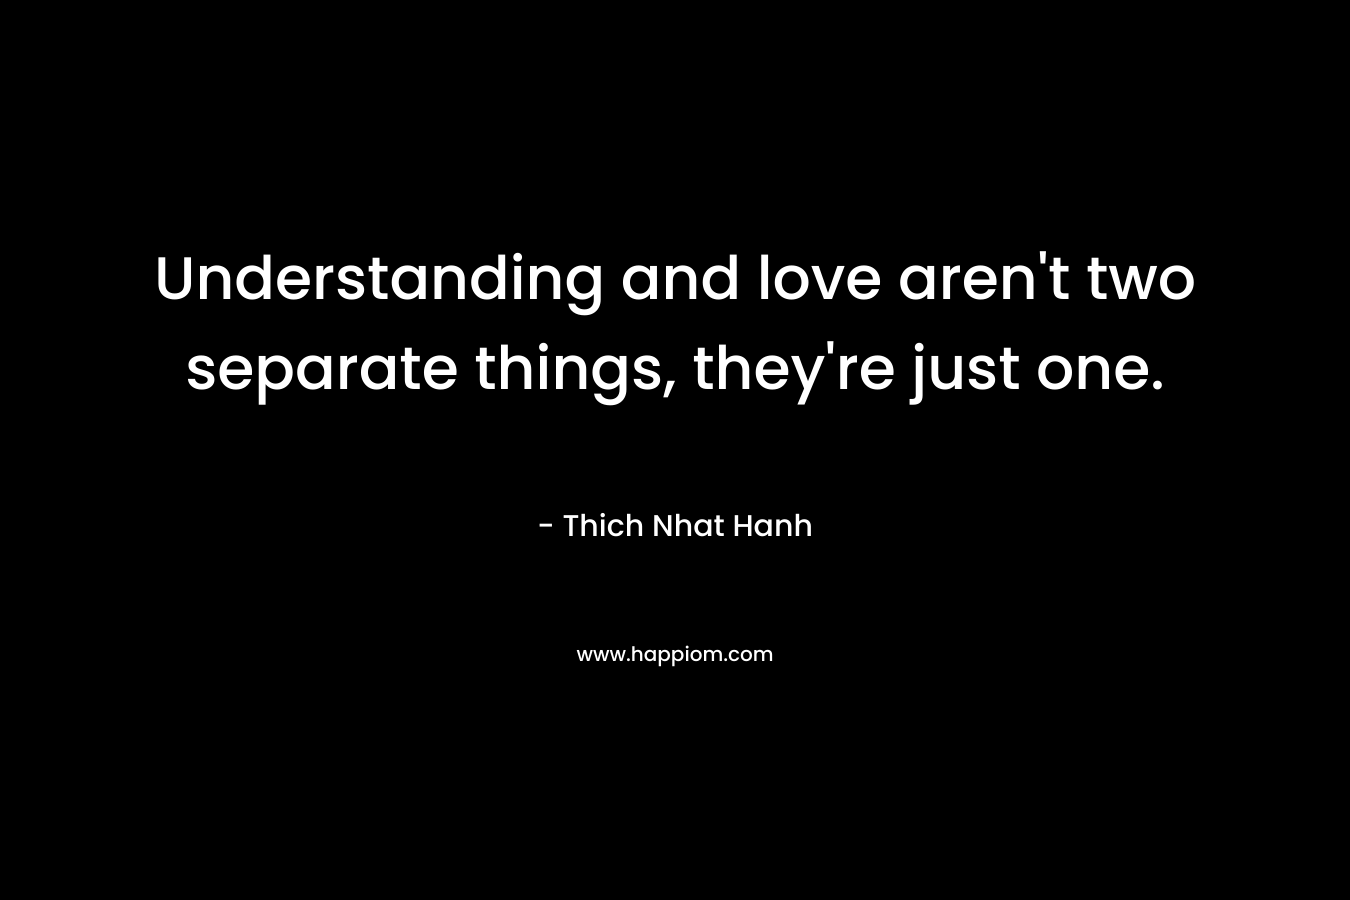 Understanding and love aren't two separate things, they're just one.